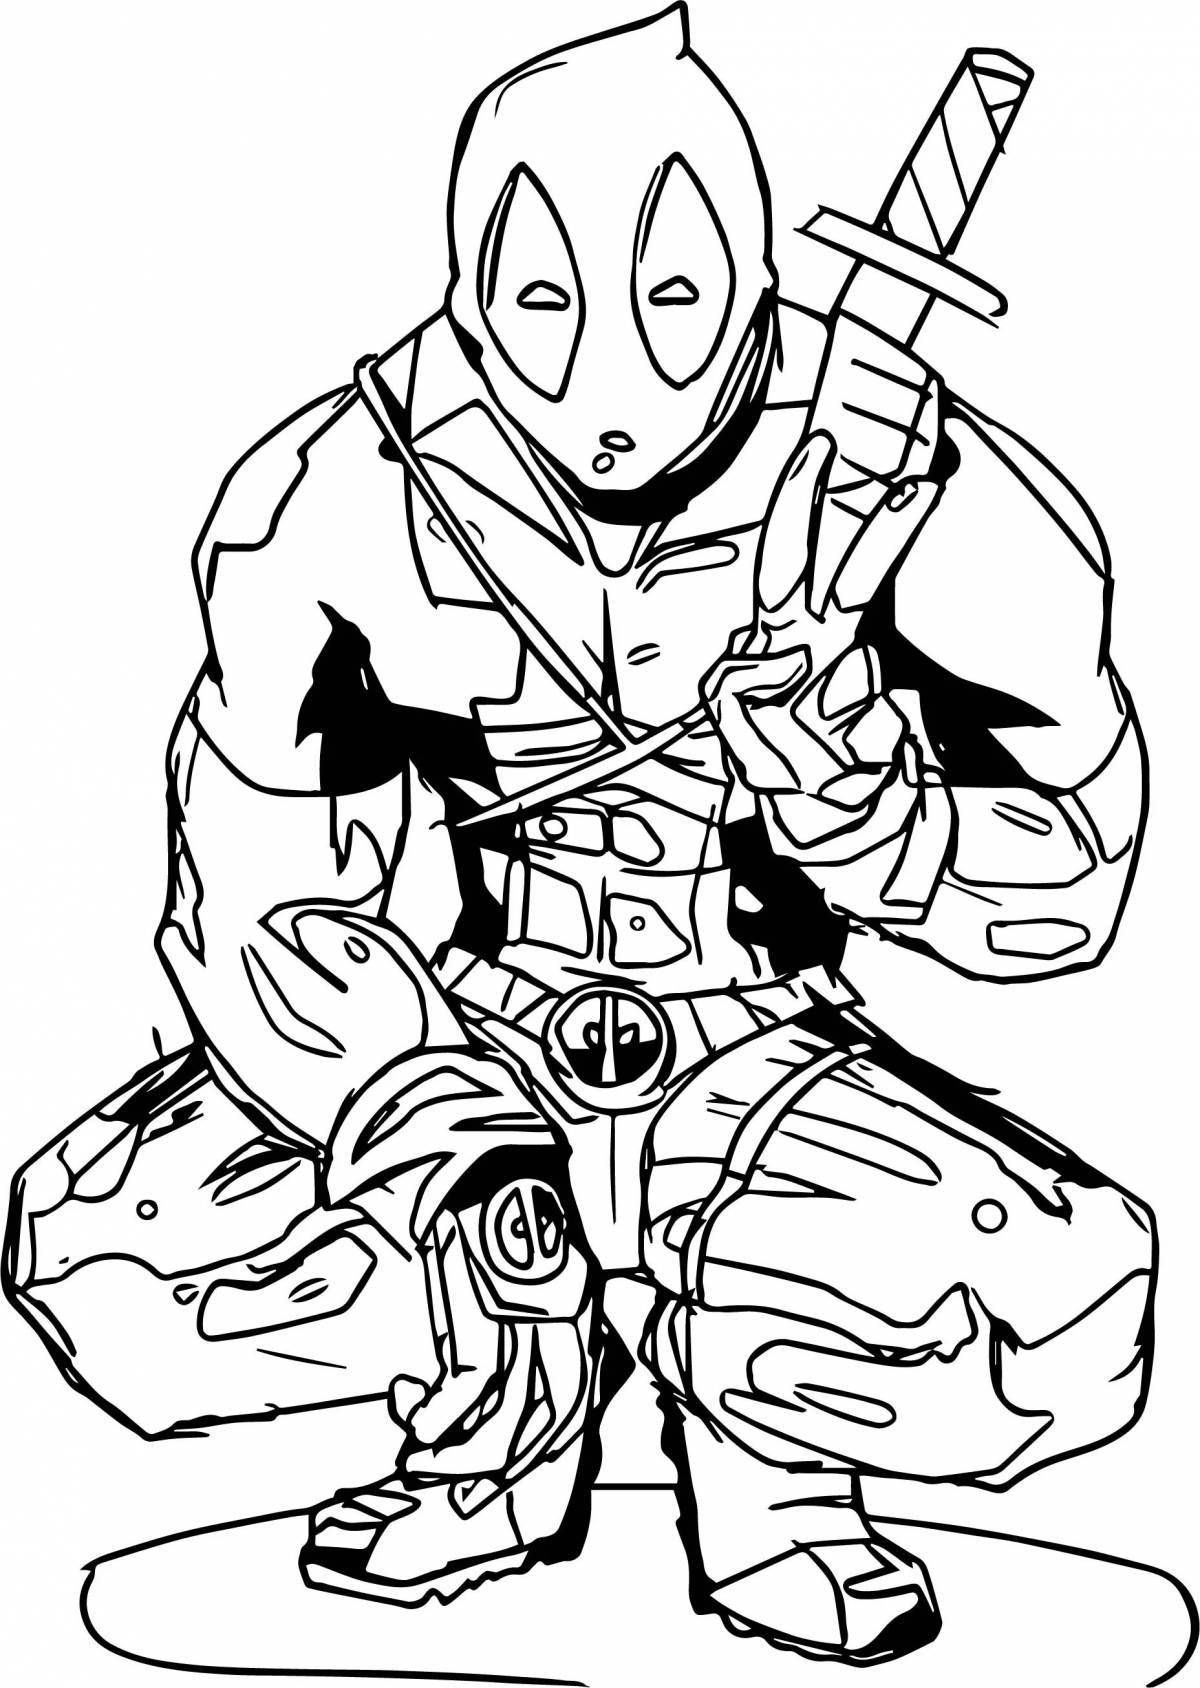 Cute deadpool and spiderman coloring pages for kids